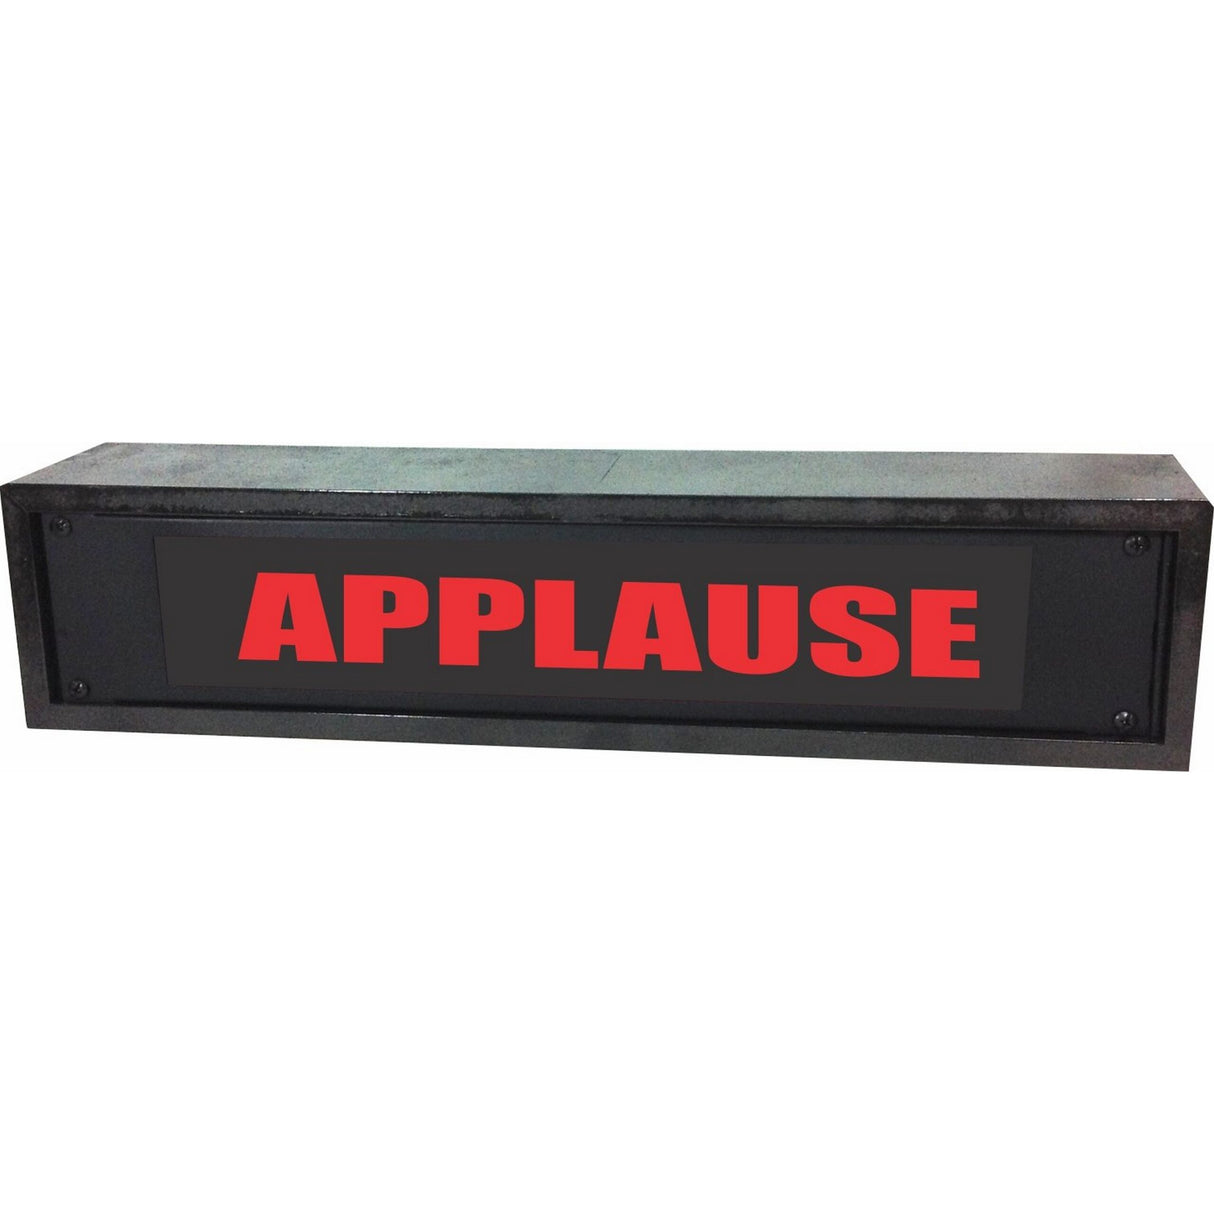 American Recorder OAS-4053RD "APPLAUSE" 2U Rackmount LED Lighted Sign with Enclosure, Red